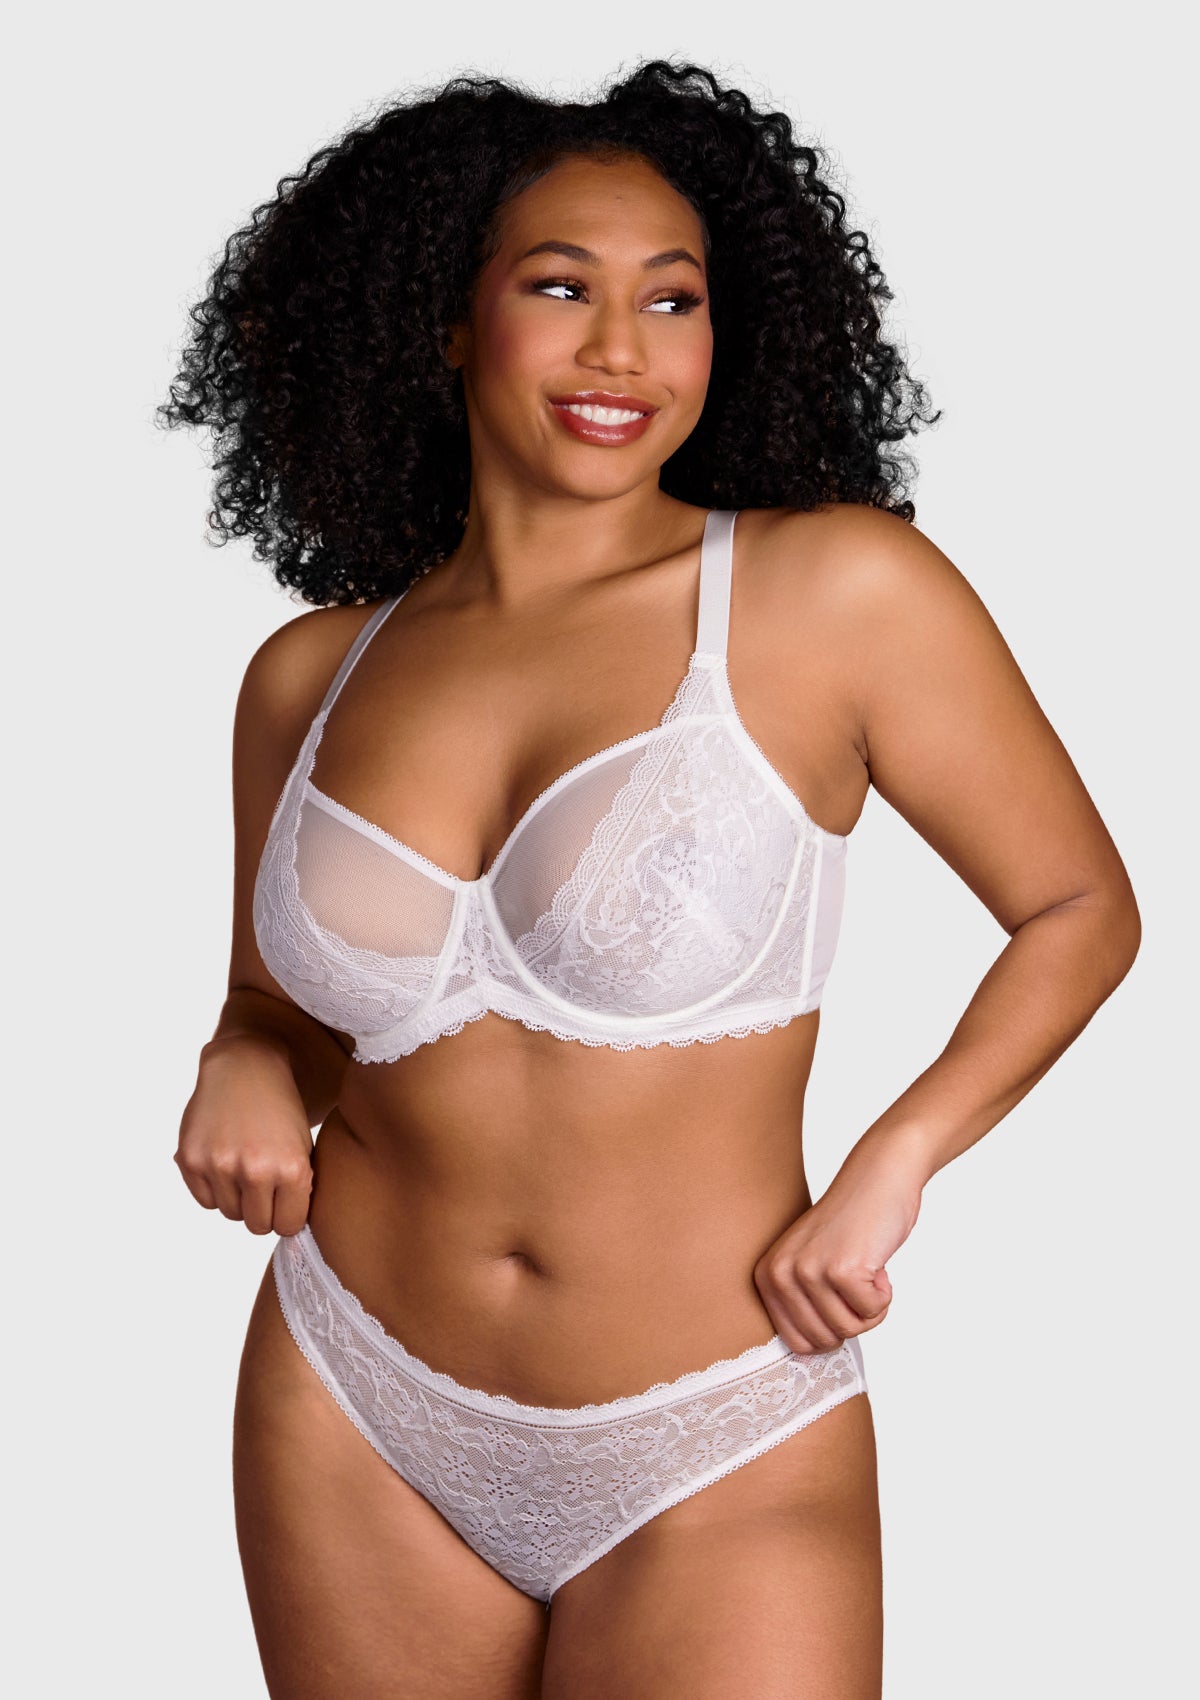 HSIA Anemone Big Bra: Best Bra For Lift And Support, Floral Bra - Burgundy / 40 / C